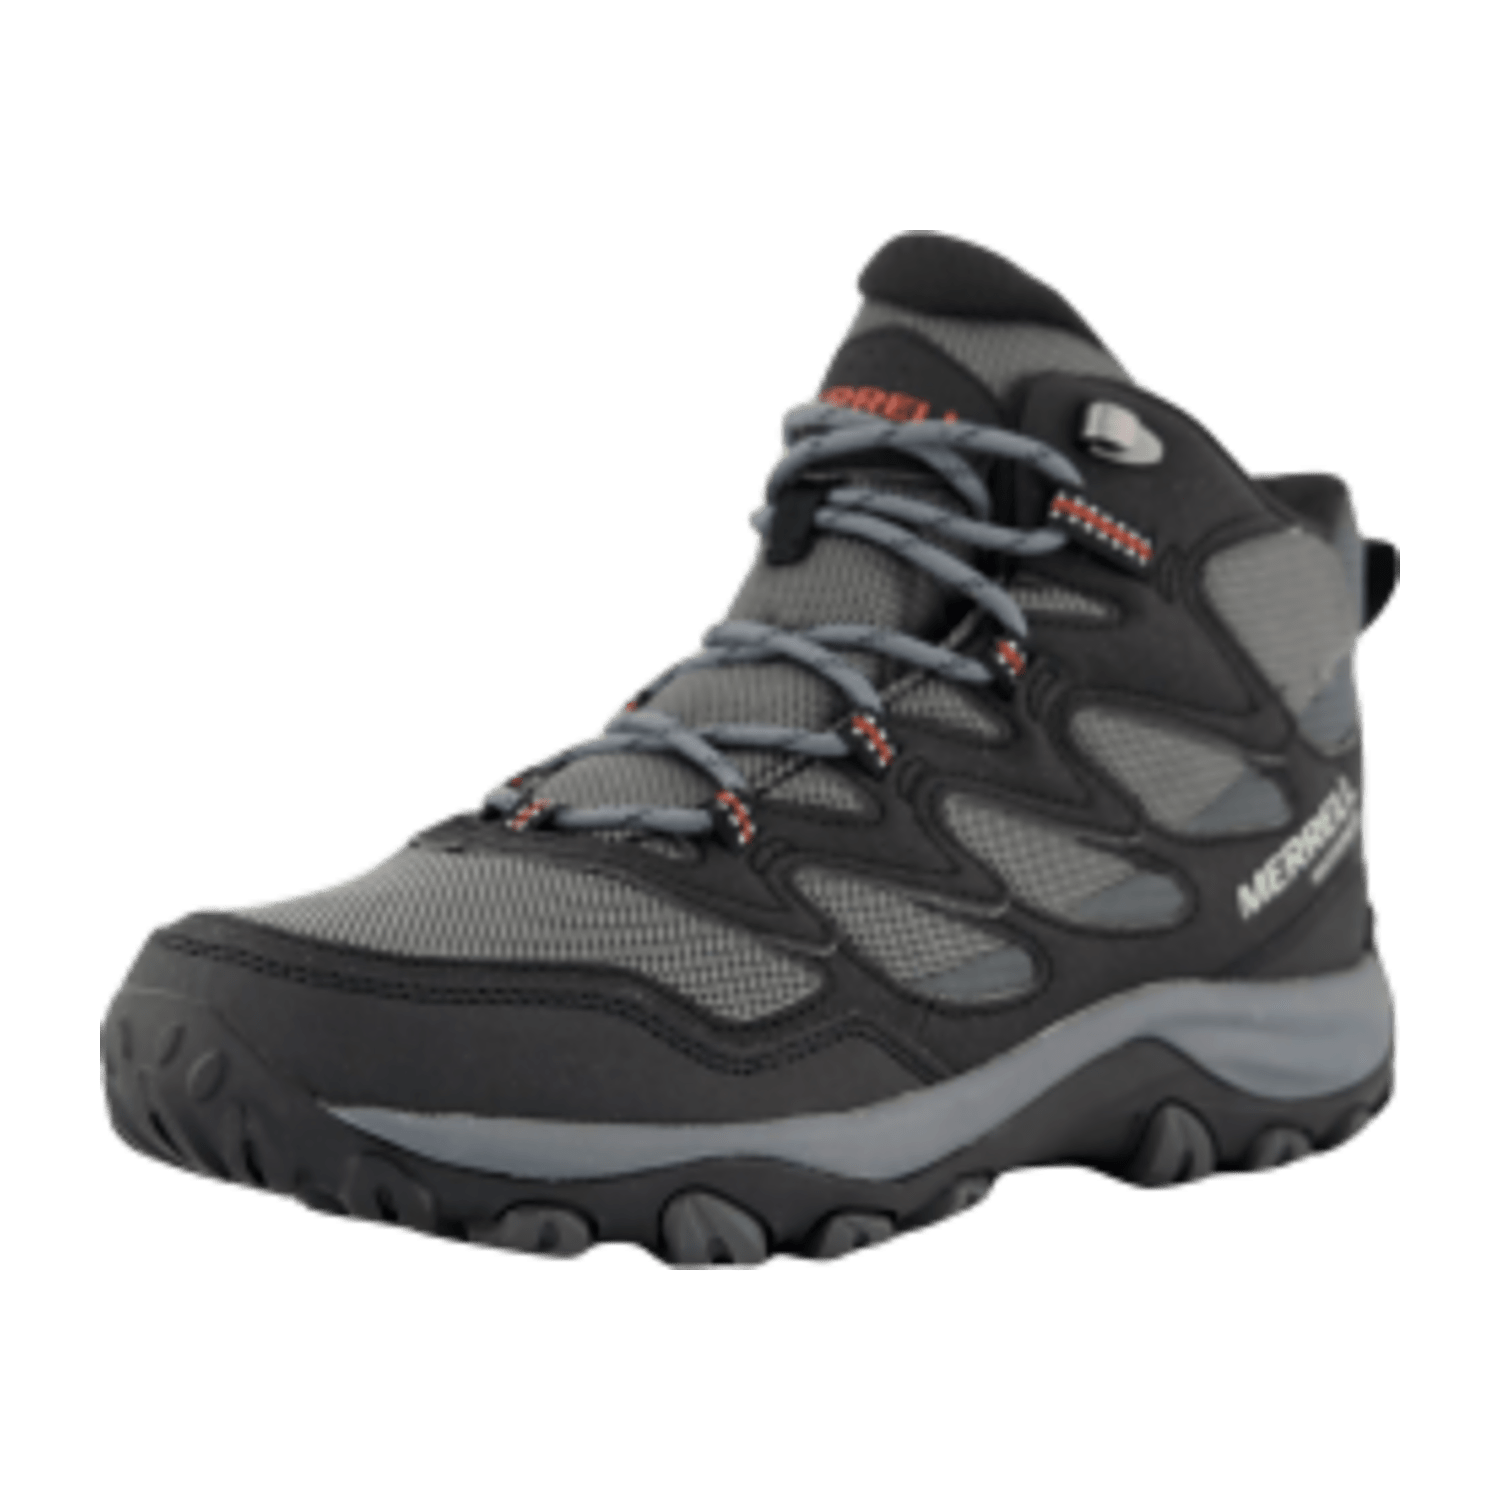 Merrell WEST RIM SPORT THERMO MID WP